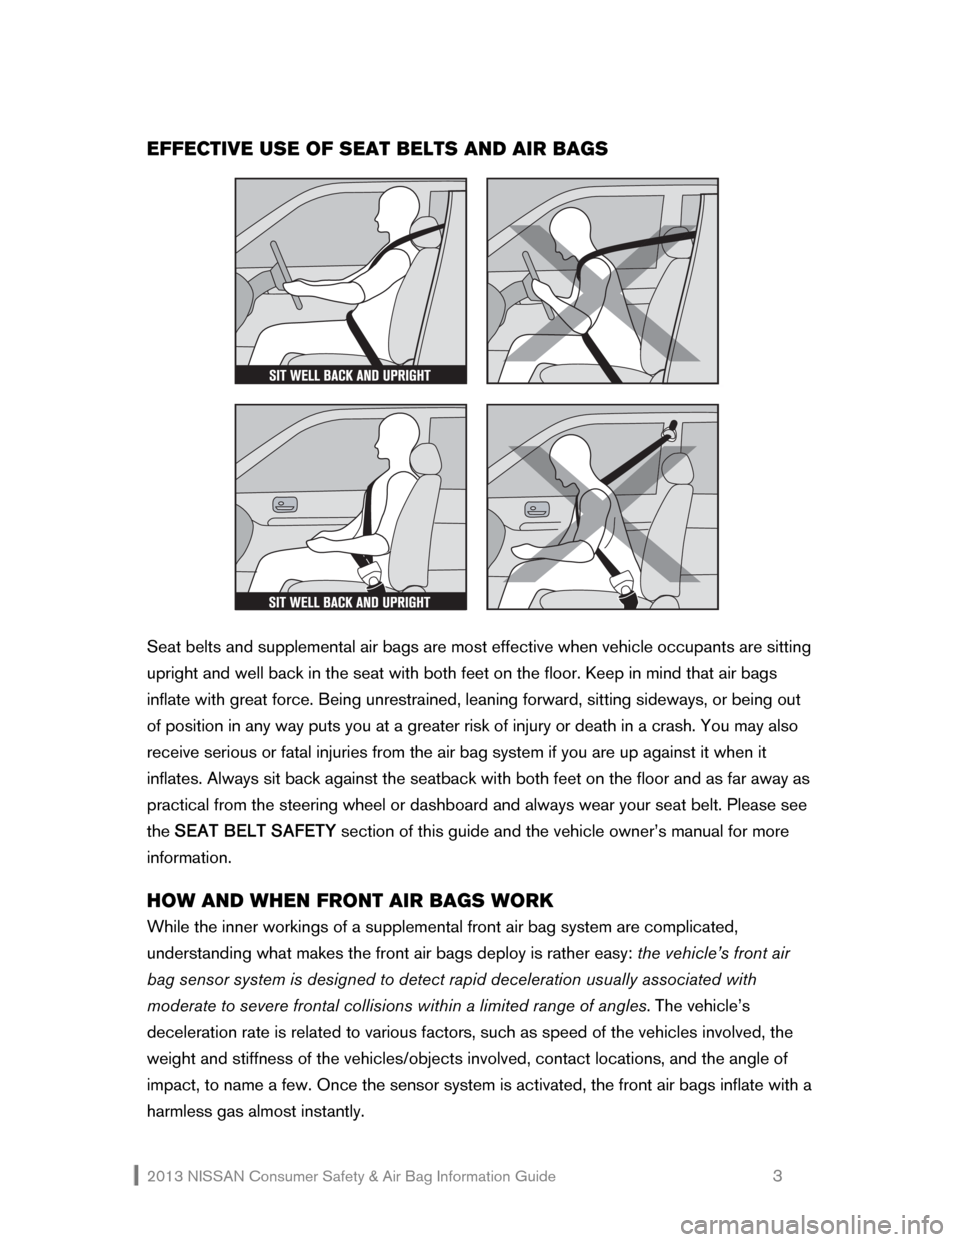 NISSAN ROGUE 2013 2.G Consumer Safety Air Bag Information Guide 2013 NISSAN Consumer Safety & Air Bag Information Guide                                                   3 
EFFECTIVE USE OF SEAT BELTS AND AIR BAGS 
 
 
 
Seat belts and supplemental air bags are mo